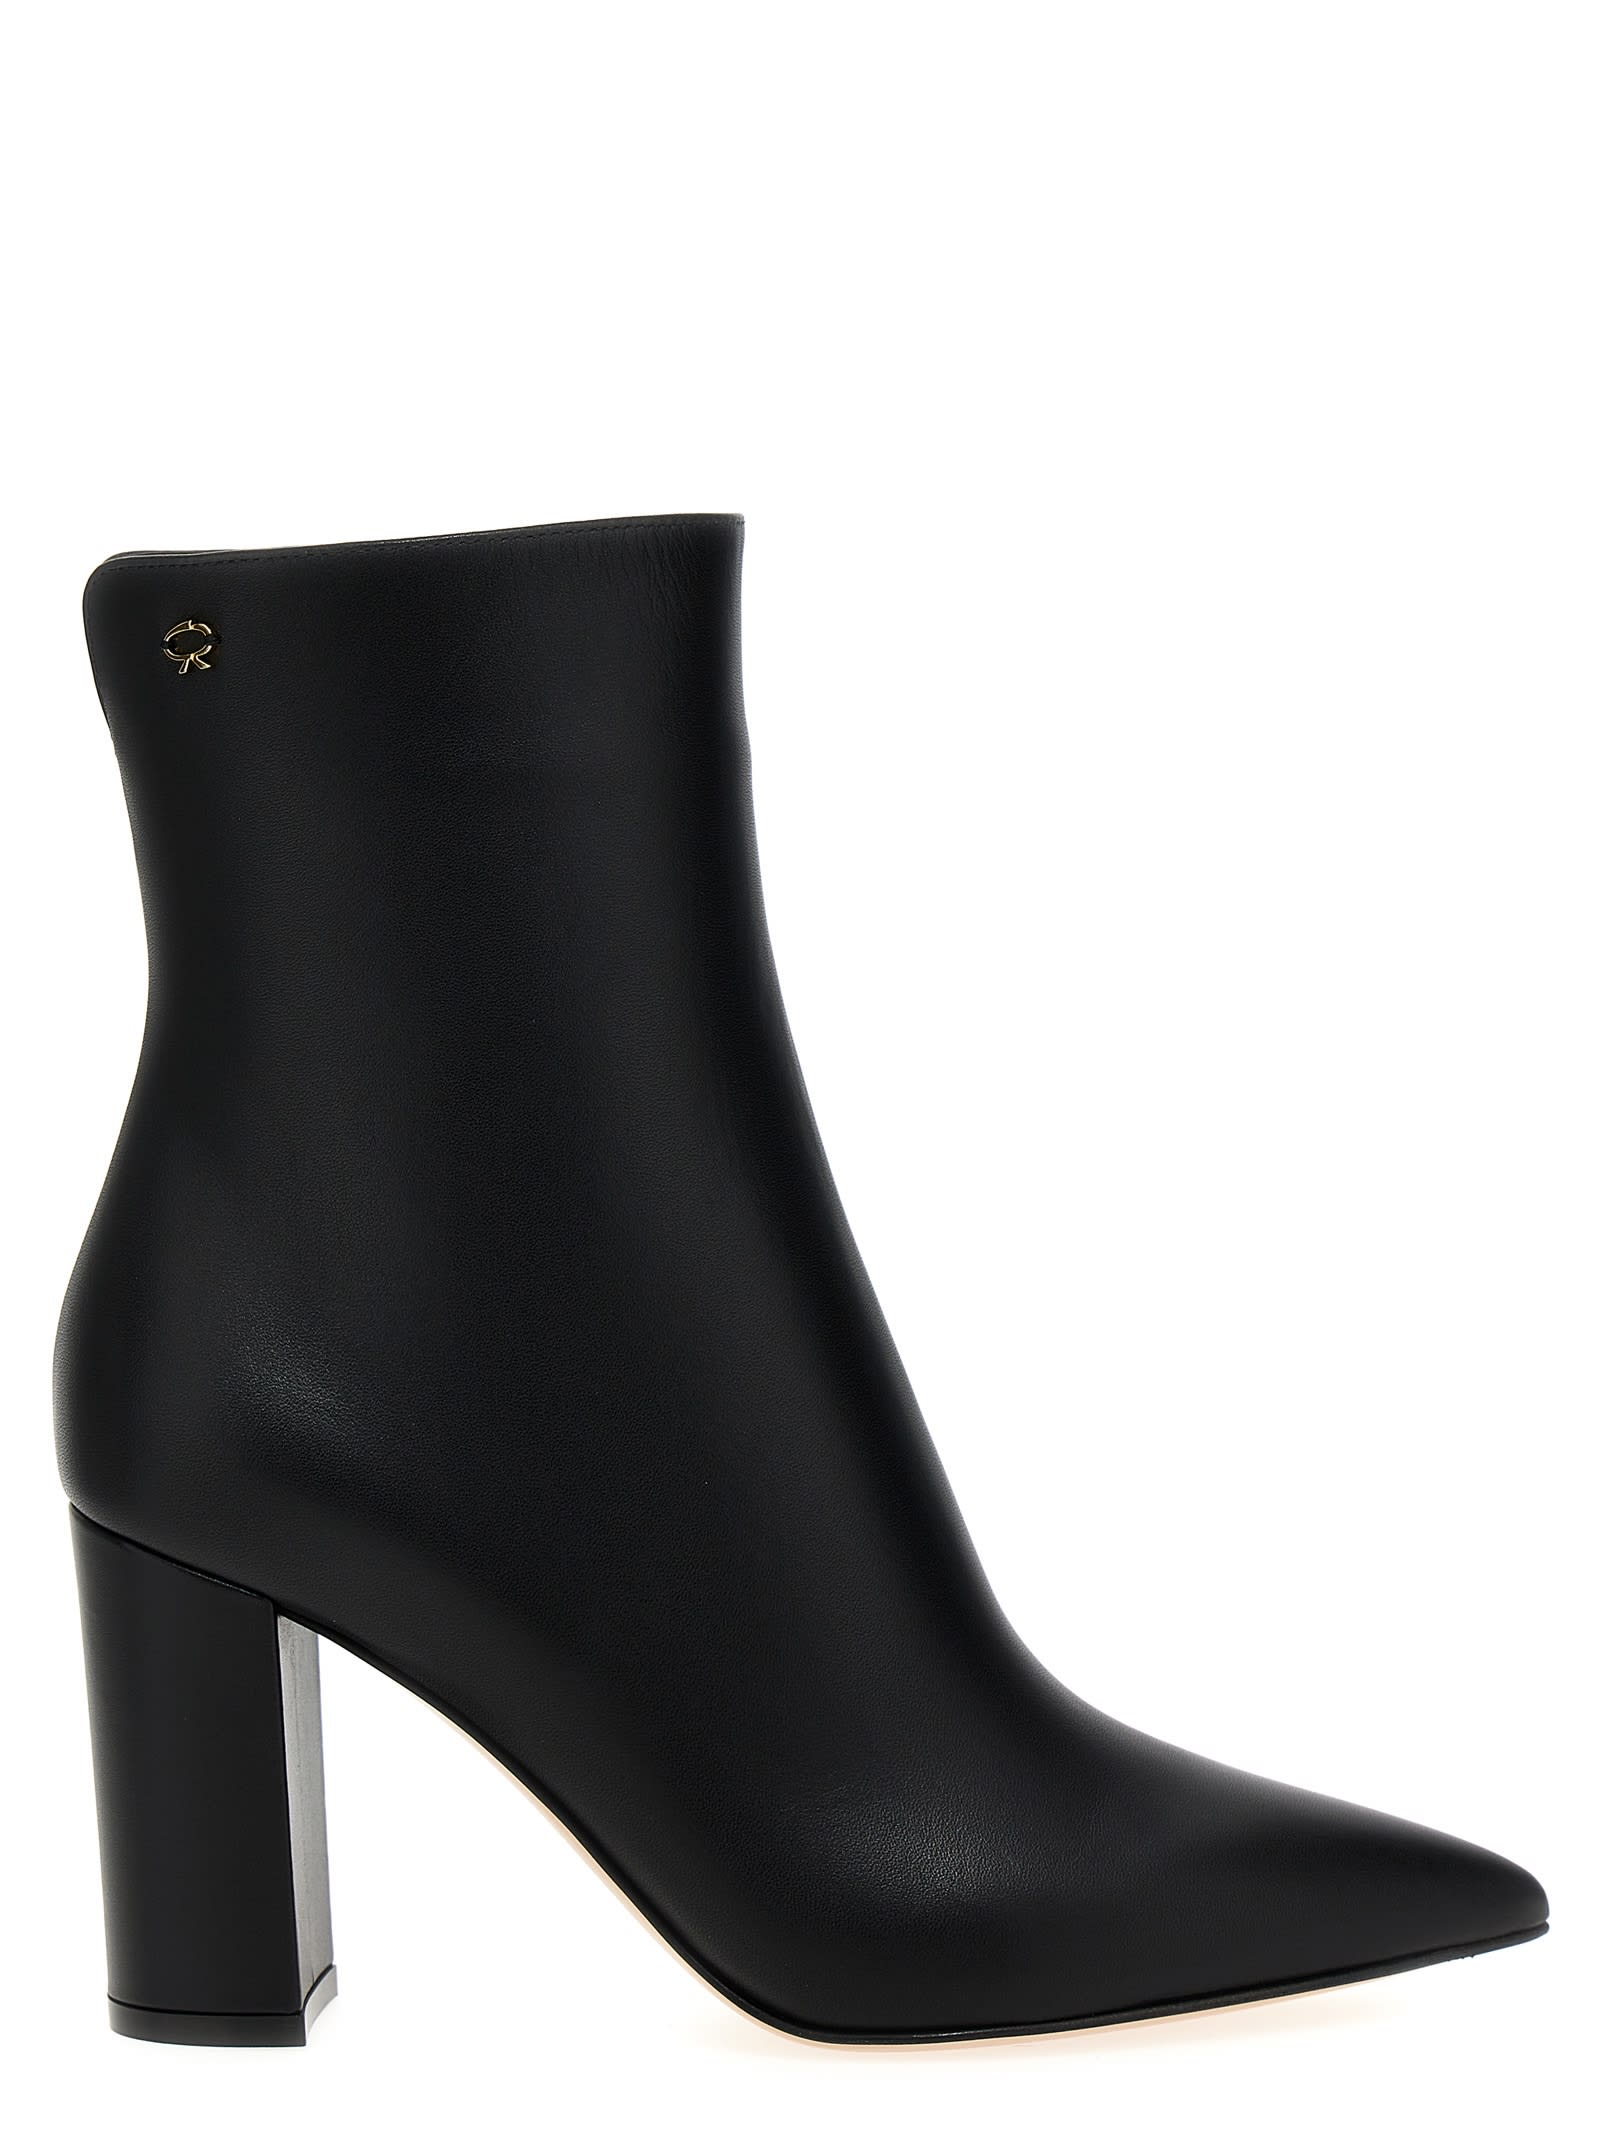 GIANVITO ROSSI LYELL ANKLE BOOTS